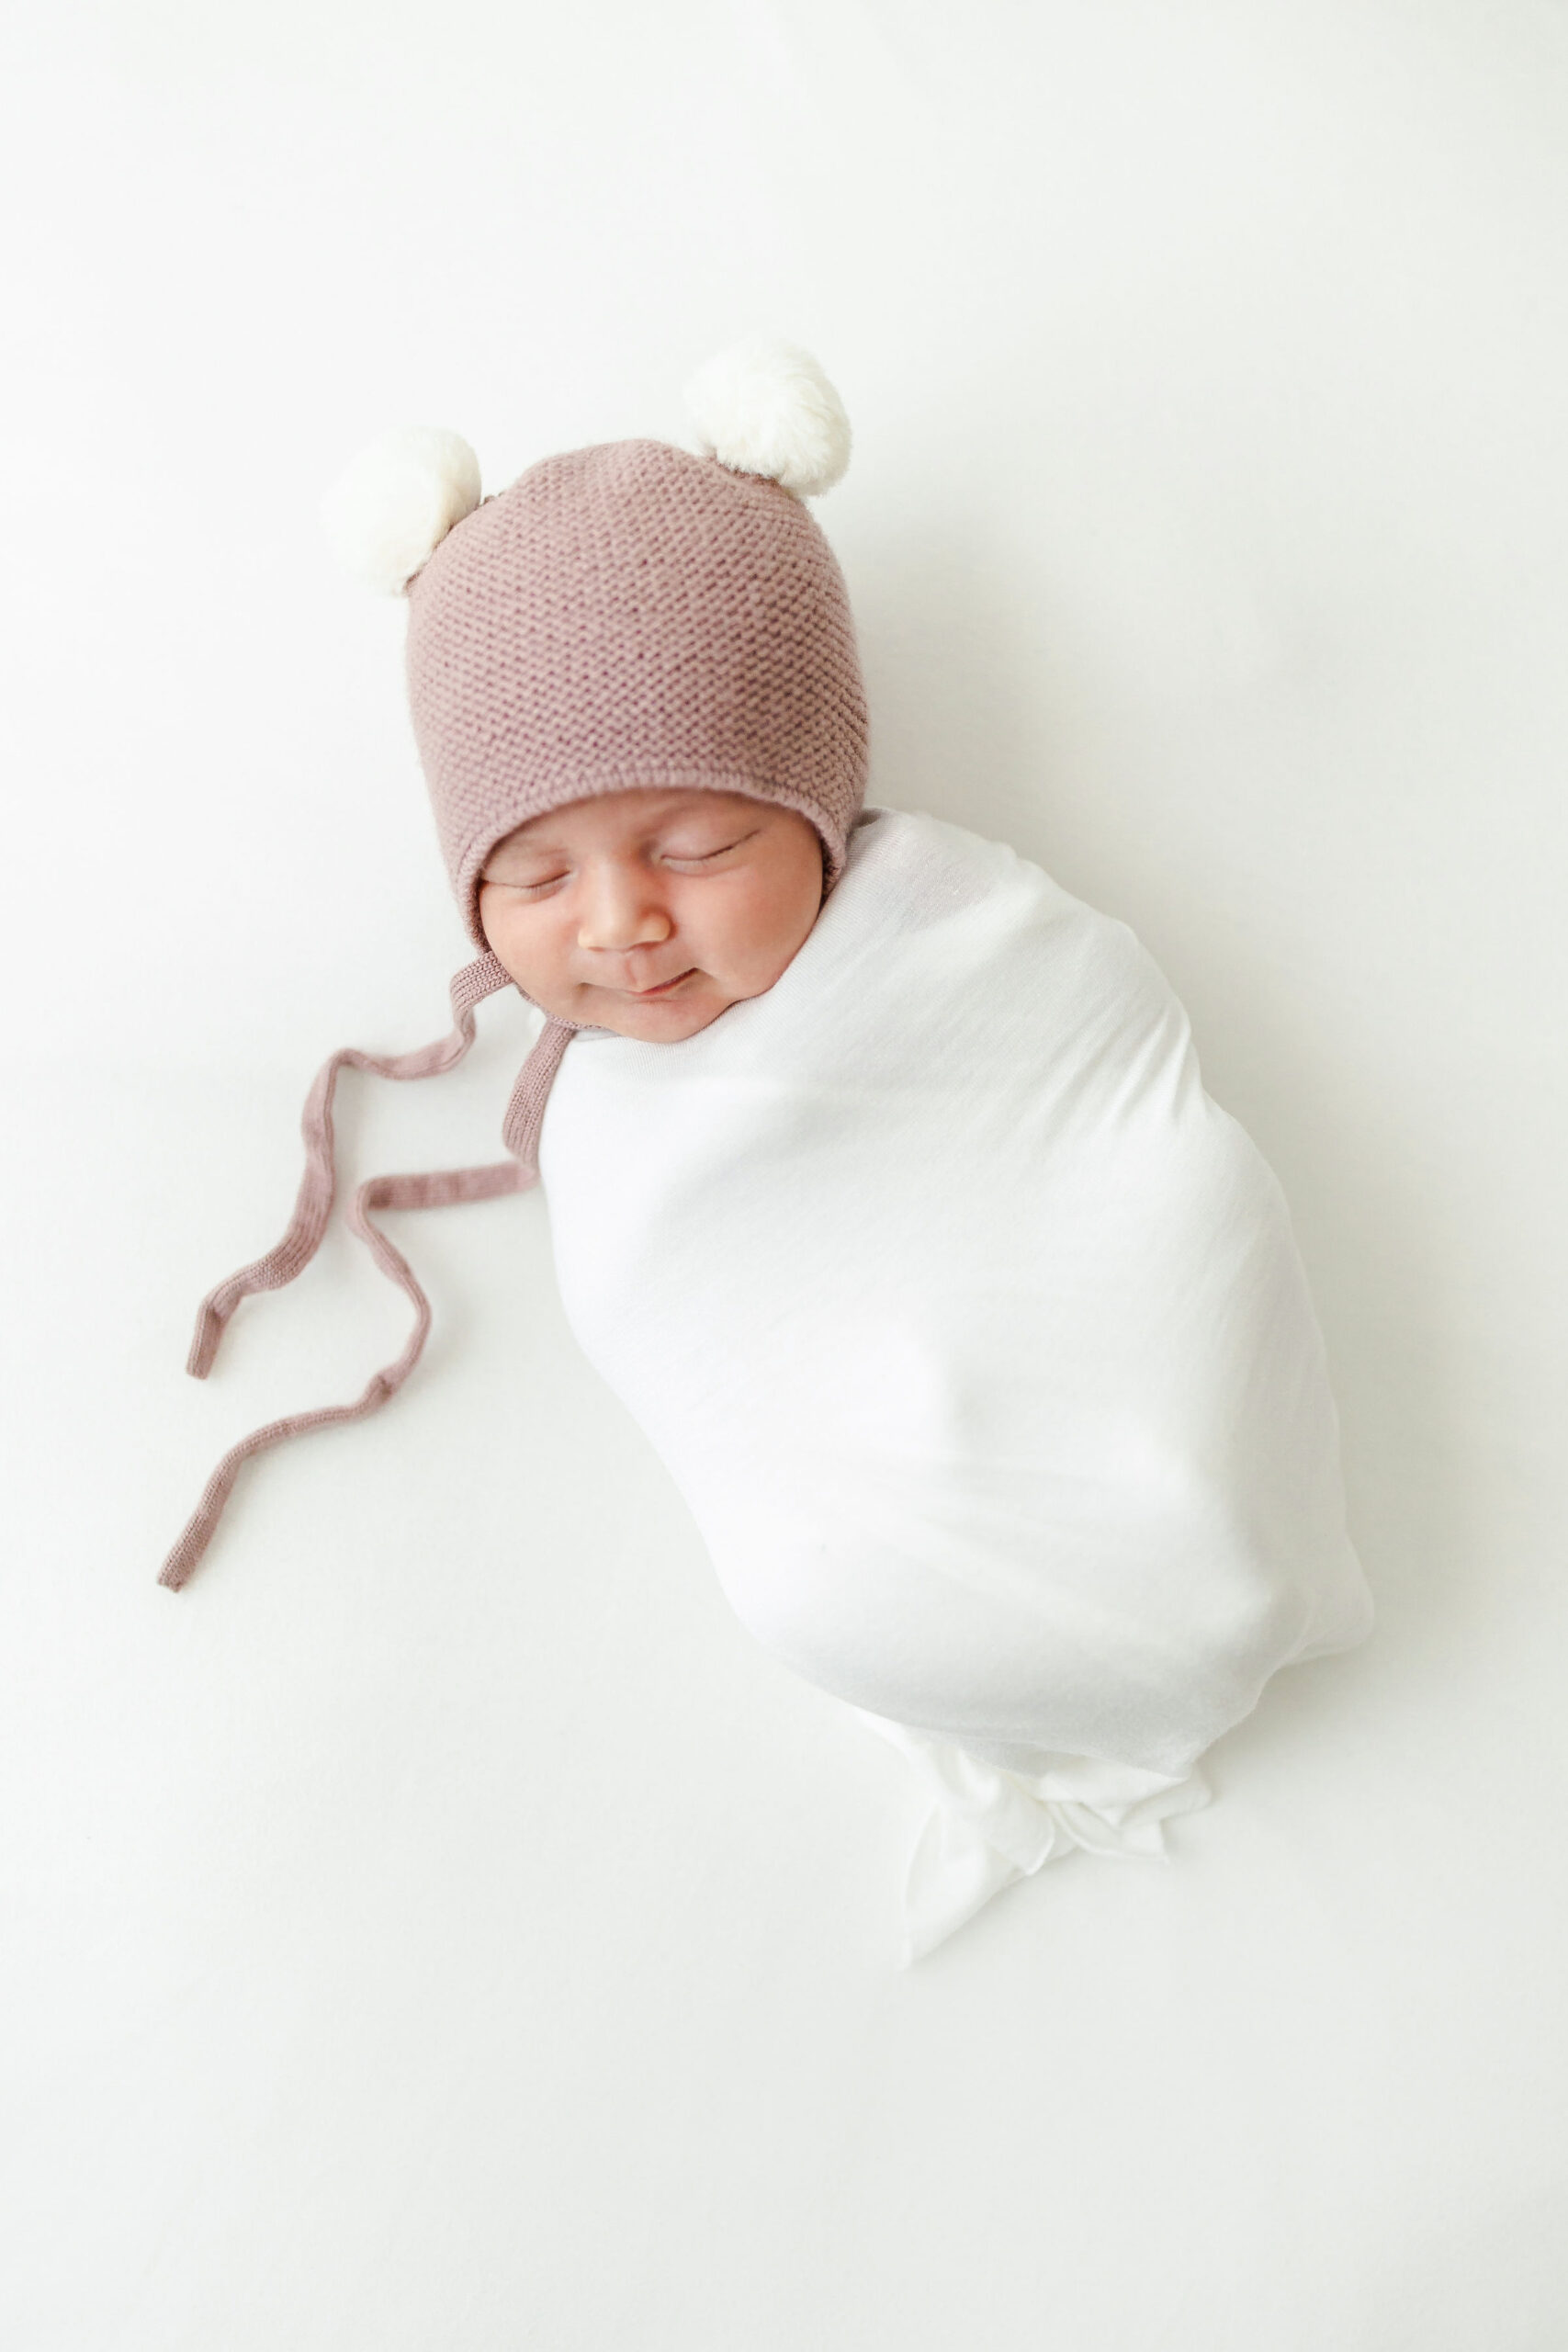 newborn baby wrapped in white with a pink bear hat Caprilina